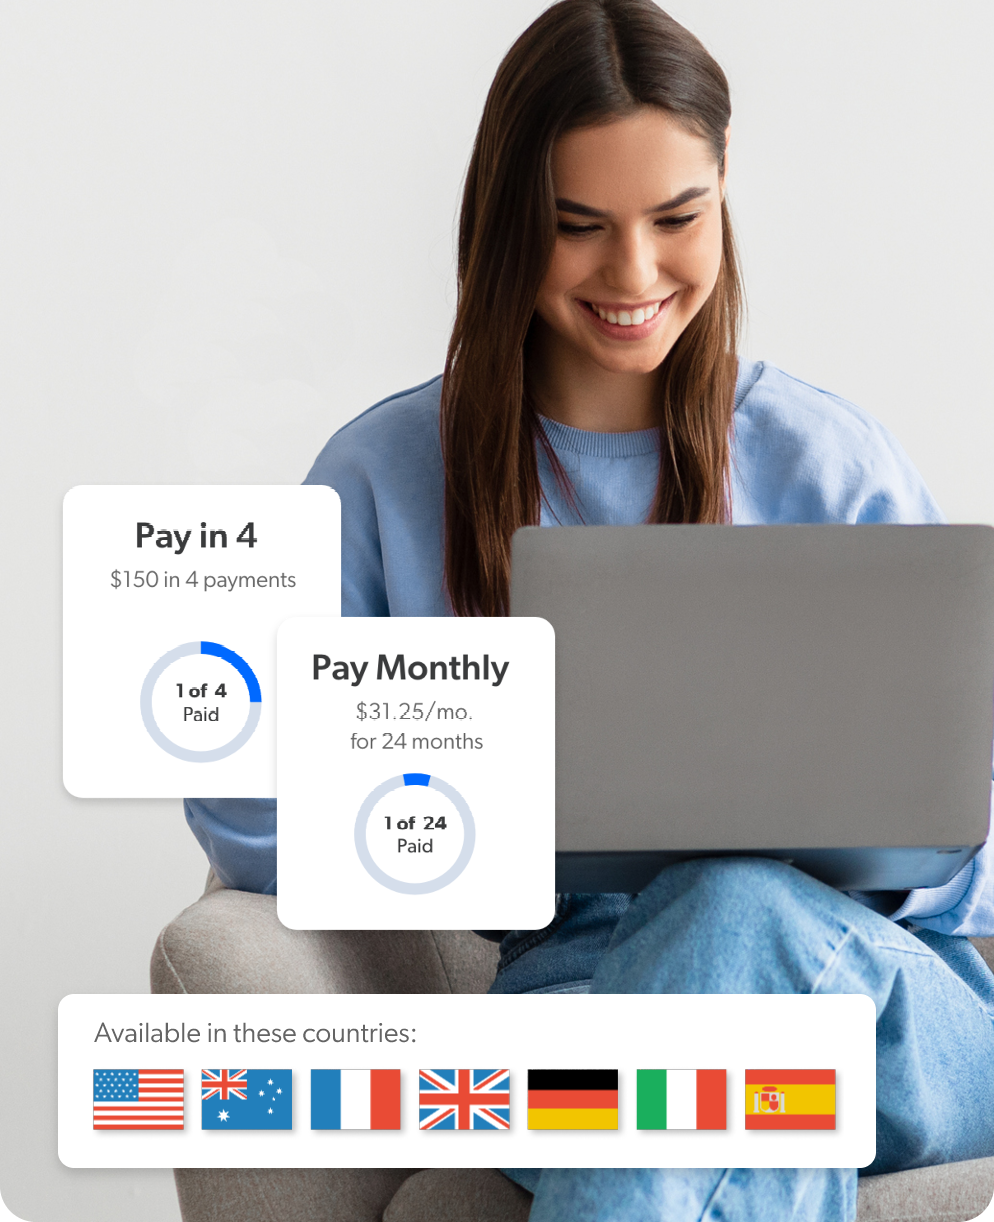 Woman on laptop with Pay in 4, Pay Monthly, and available countries highlighted in foreground.